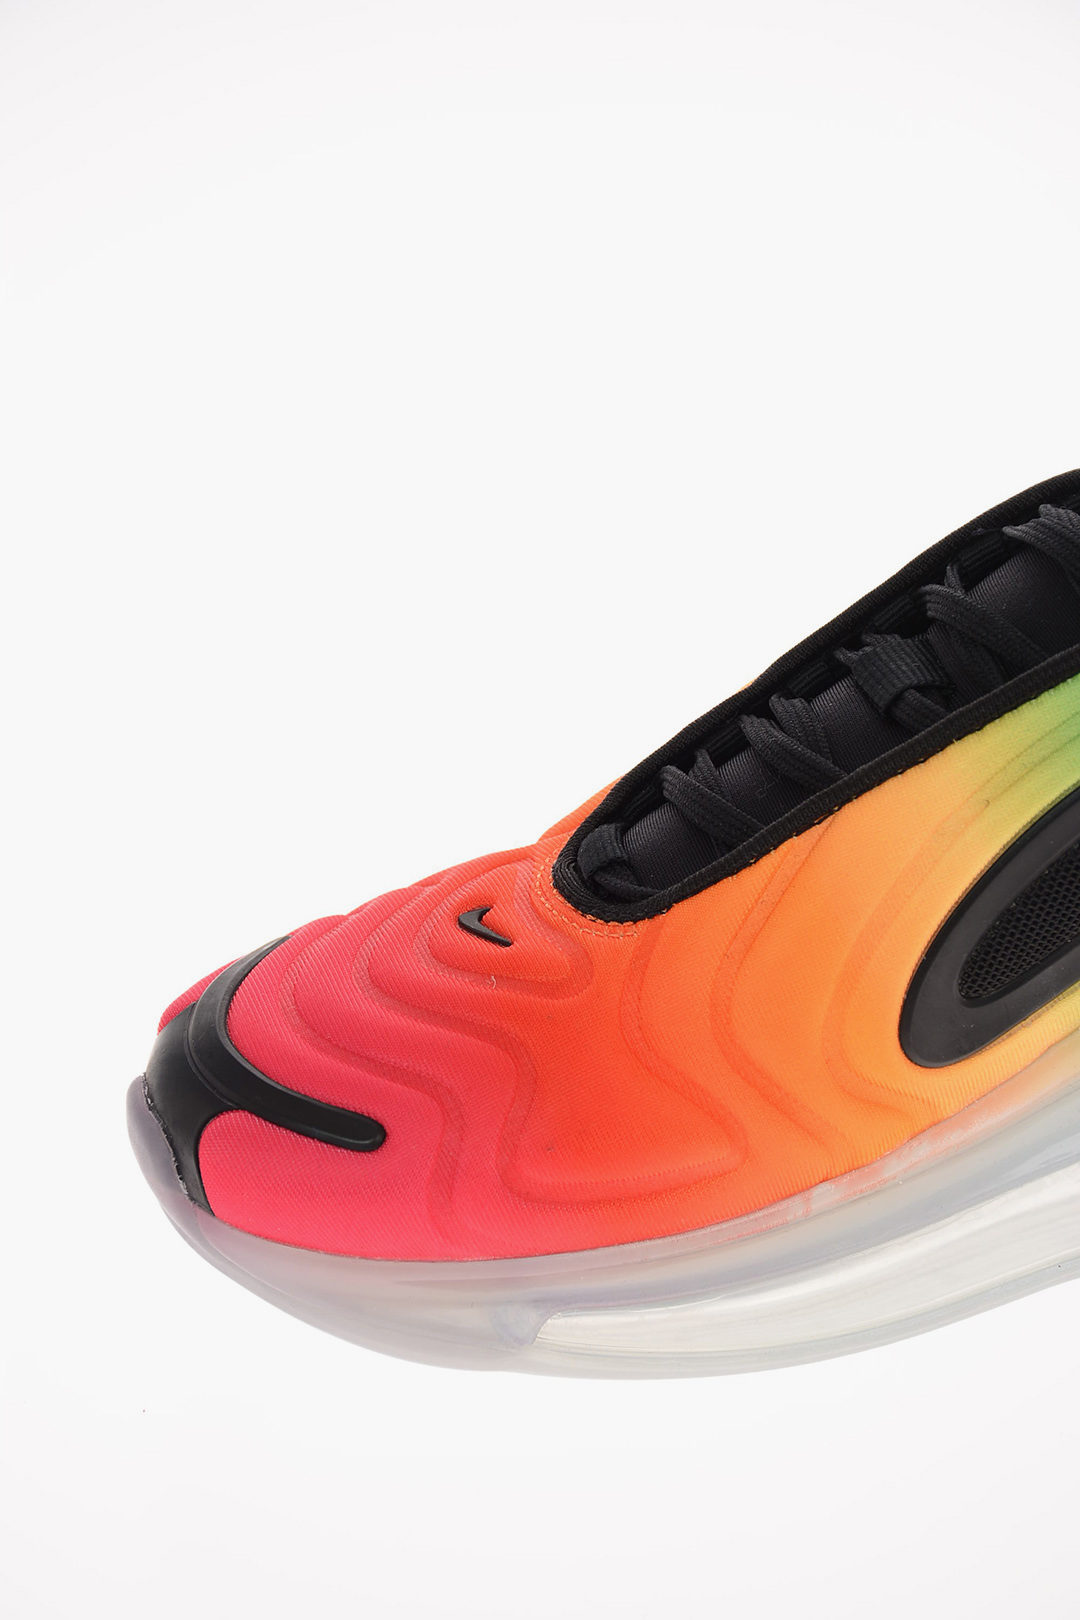 ambiente Abrazadera estilo Nike GILBERT BAKER Fabric AIR MAX 720 BETRUE Sneakers with Air Bubble Sole  women - Glamood Outlet